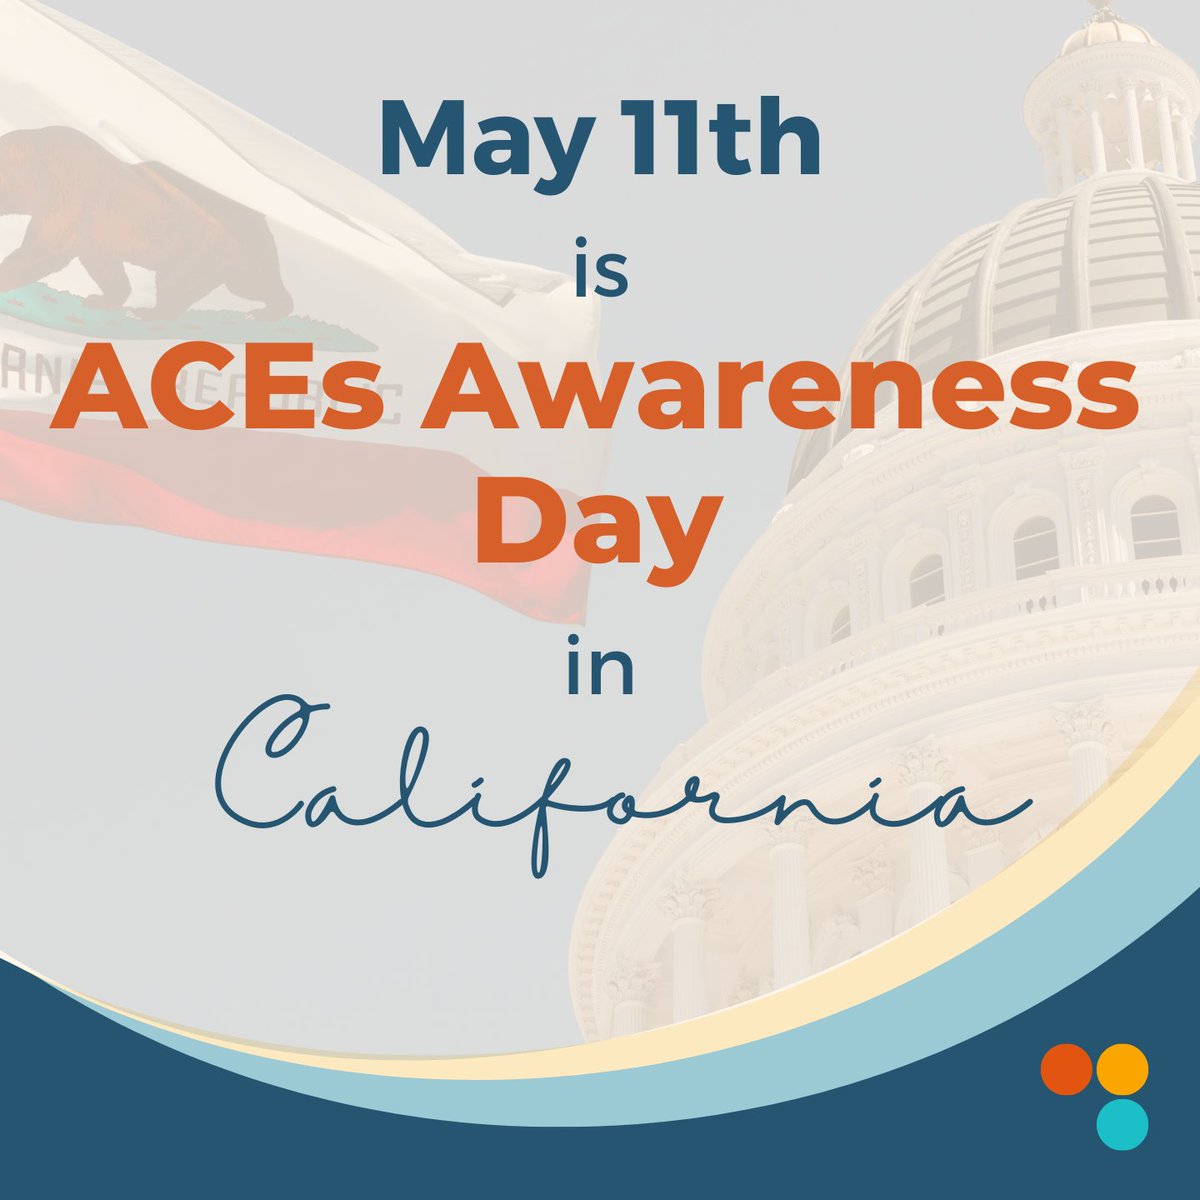 Gov. @GavinNewsom proclaimed May 11, as ACEs Awareness Day in CA. “On ACEs Awareness Day, we uplift the need to increase understanding of ACEs and their potential long-term negative health impacts, and spread the word on evidence-based healing strategies for all Californians.”